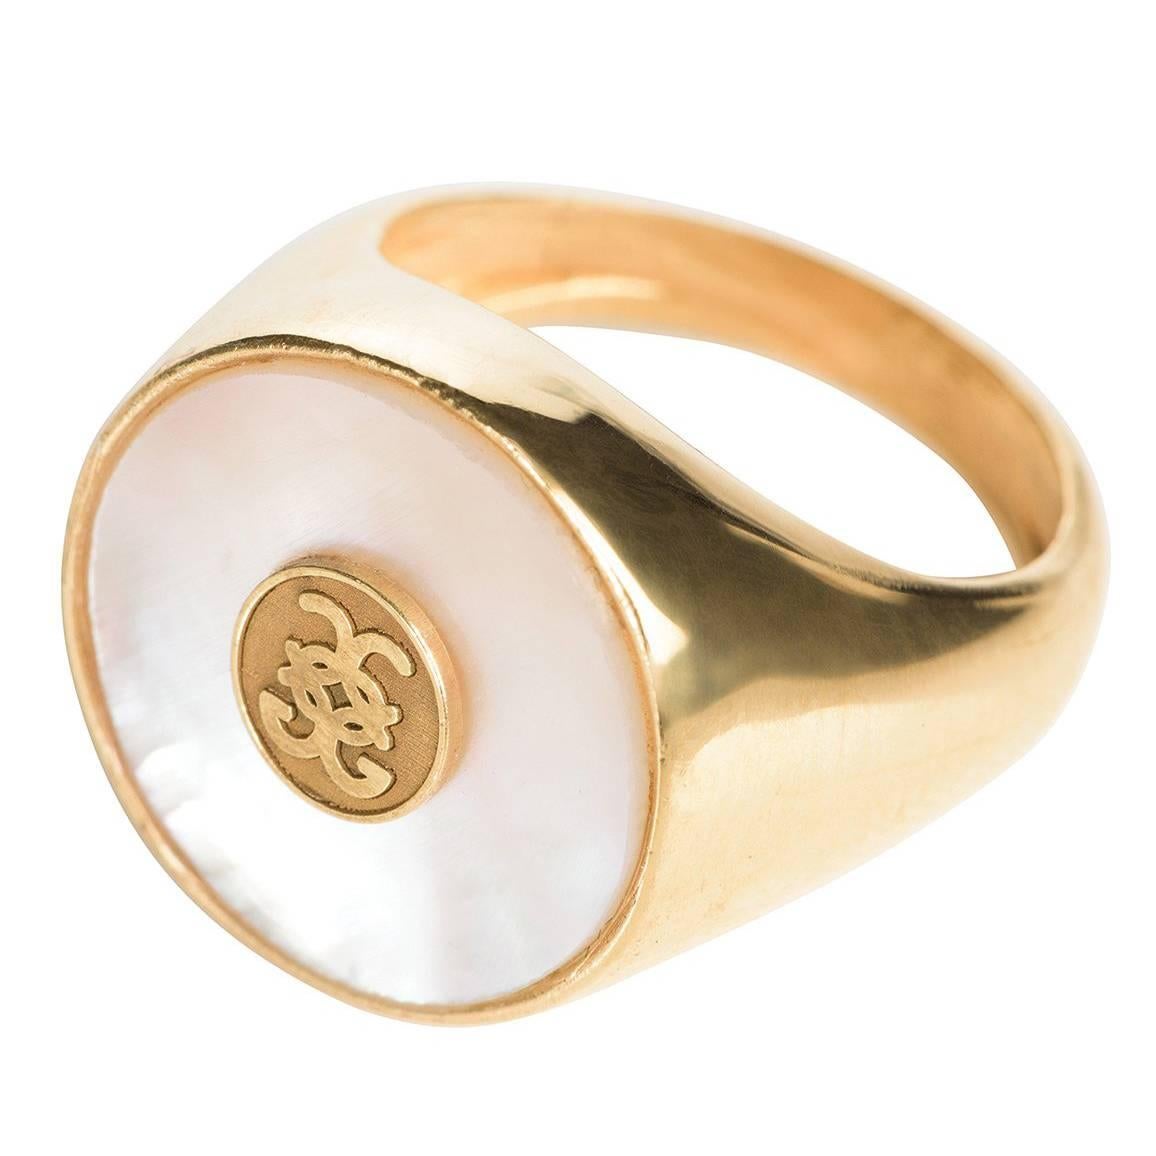 CdG Style Gold Mother-of-Pearl Gold Signet Ring Handmade in Italy For Sale